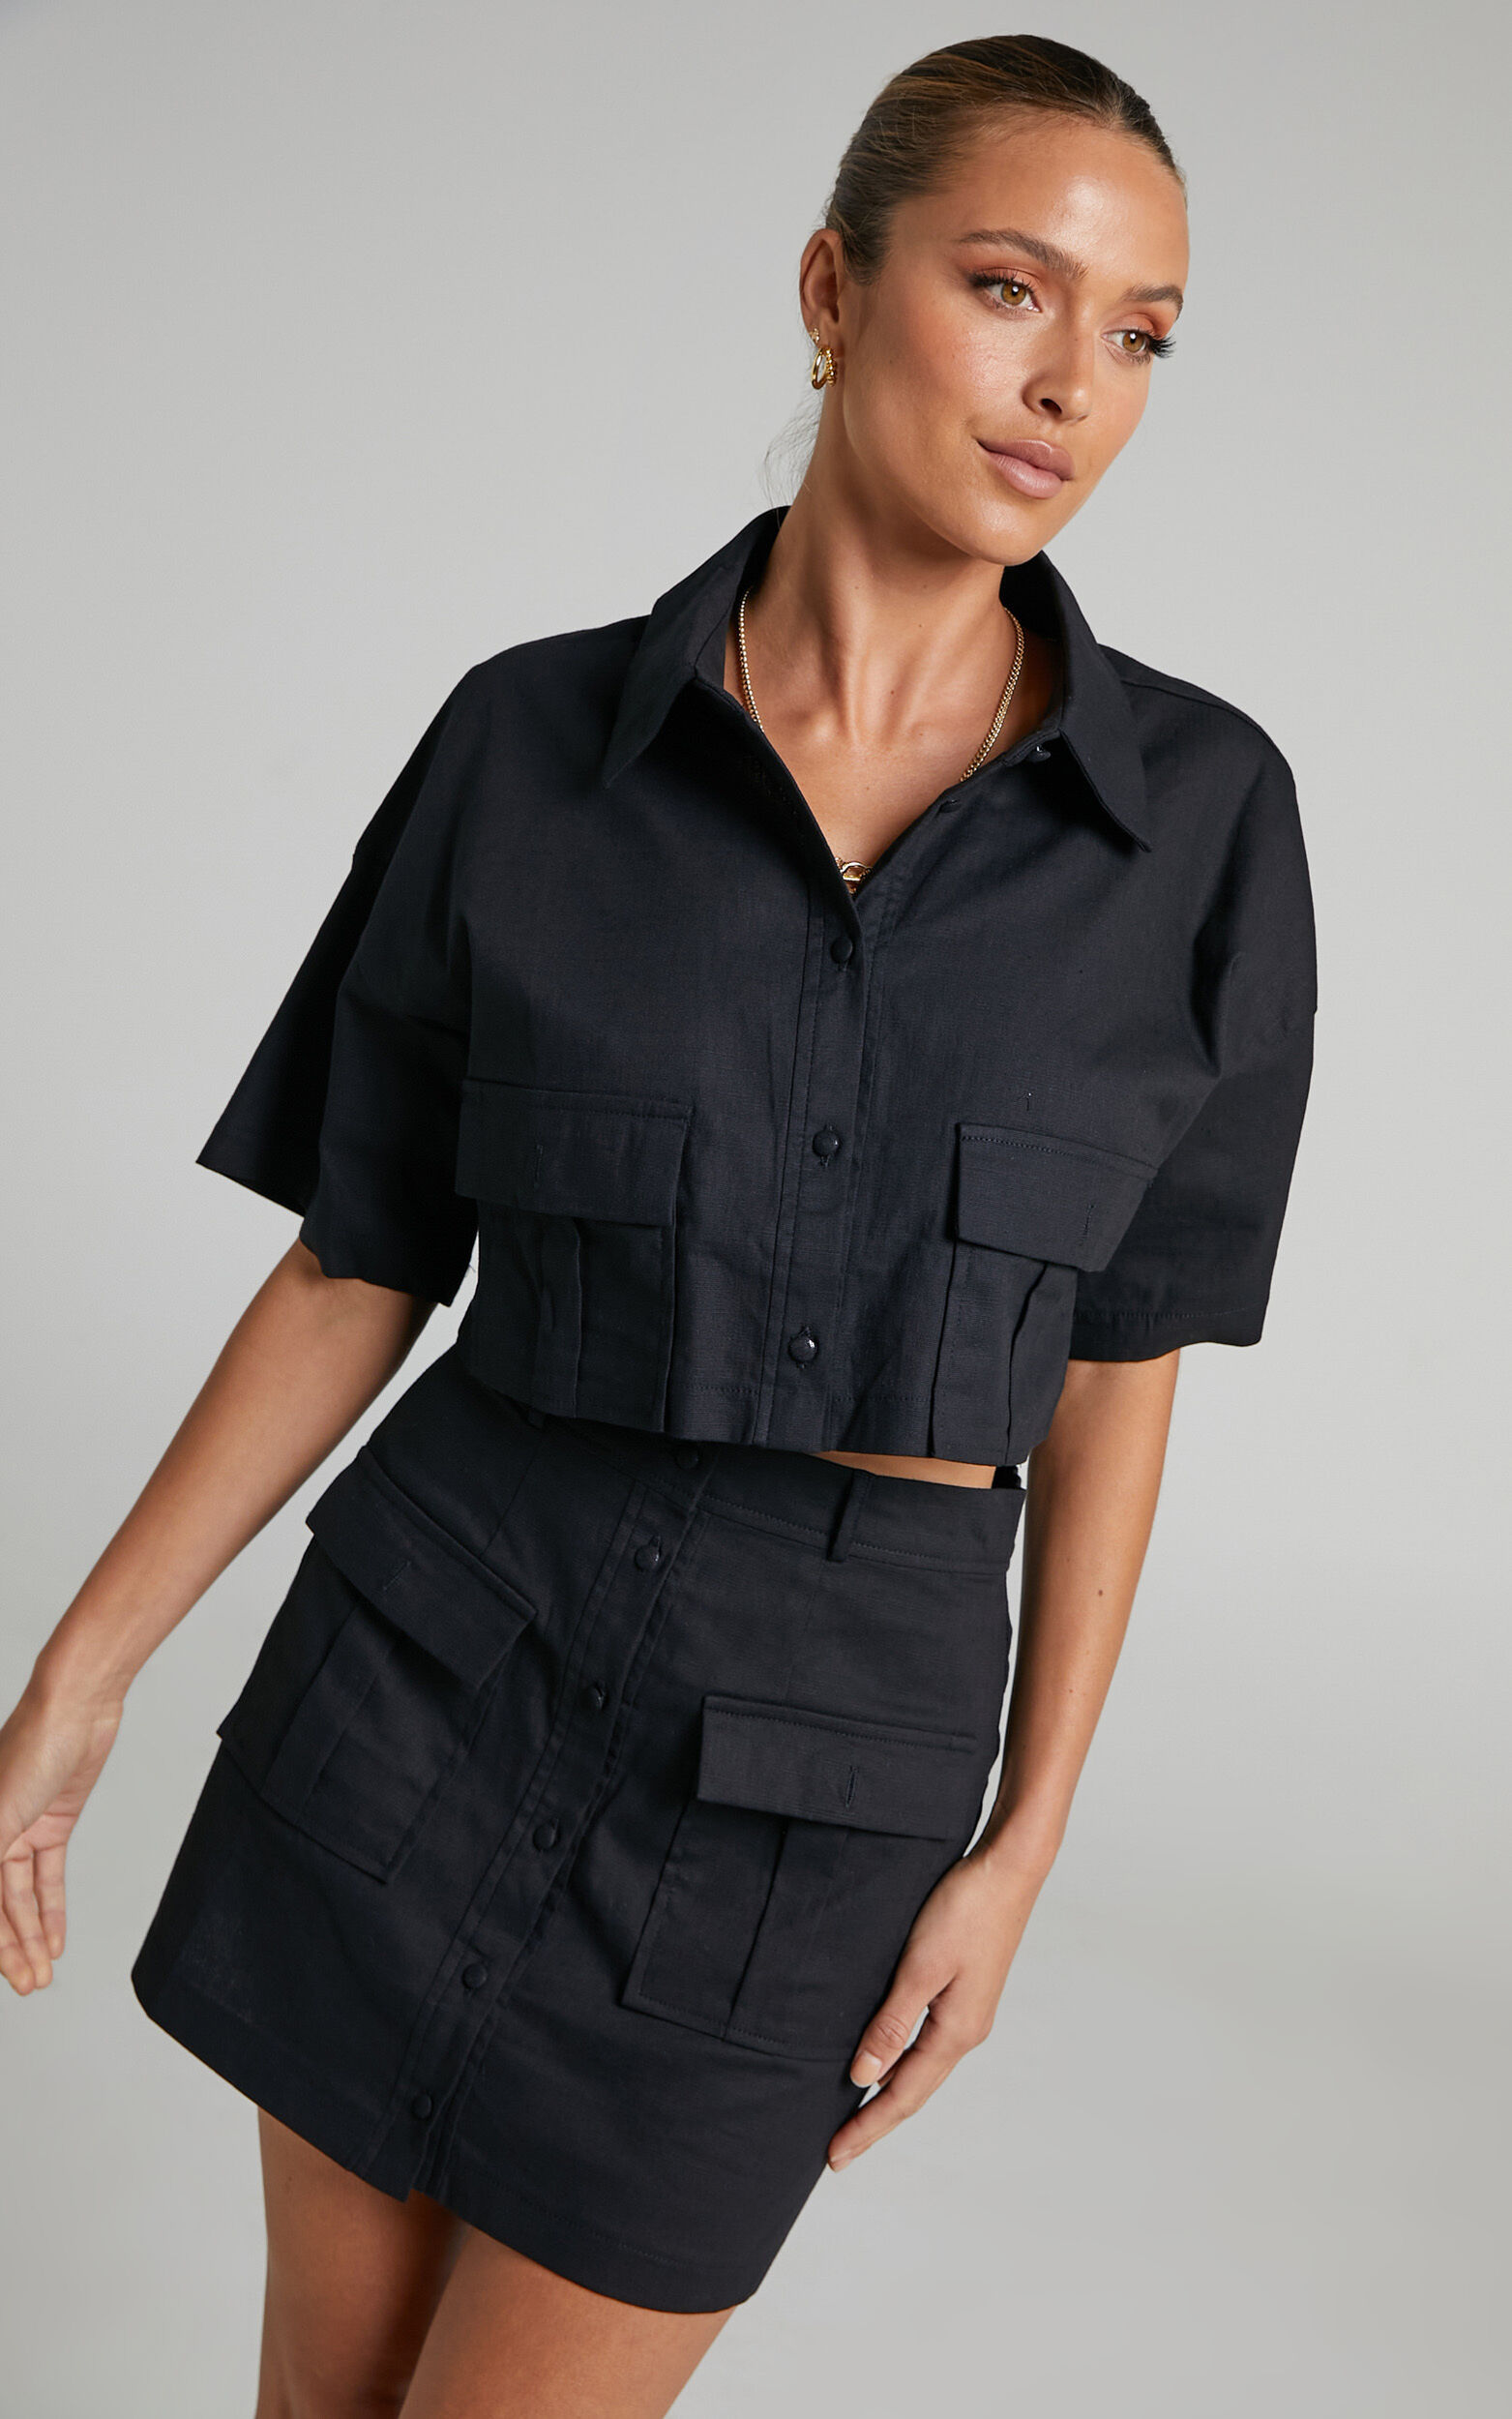 Navine Two Piece Set - Button Front Crop Top and Cargo Pocket Mini Skirt Set in Black - 04, BLK1